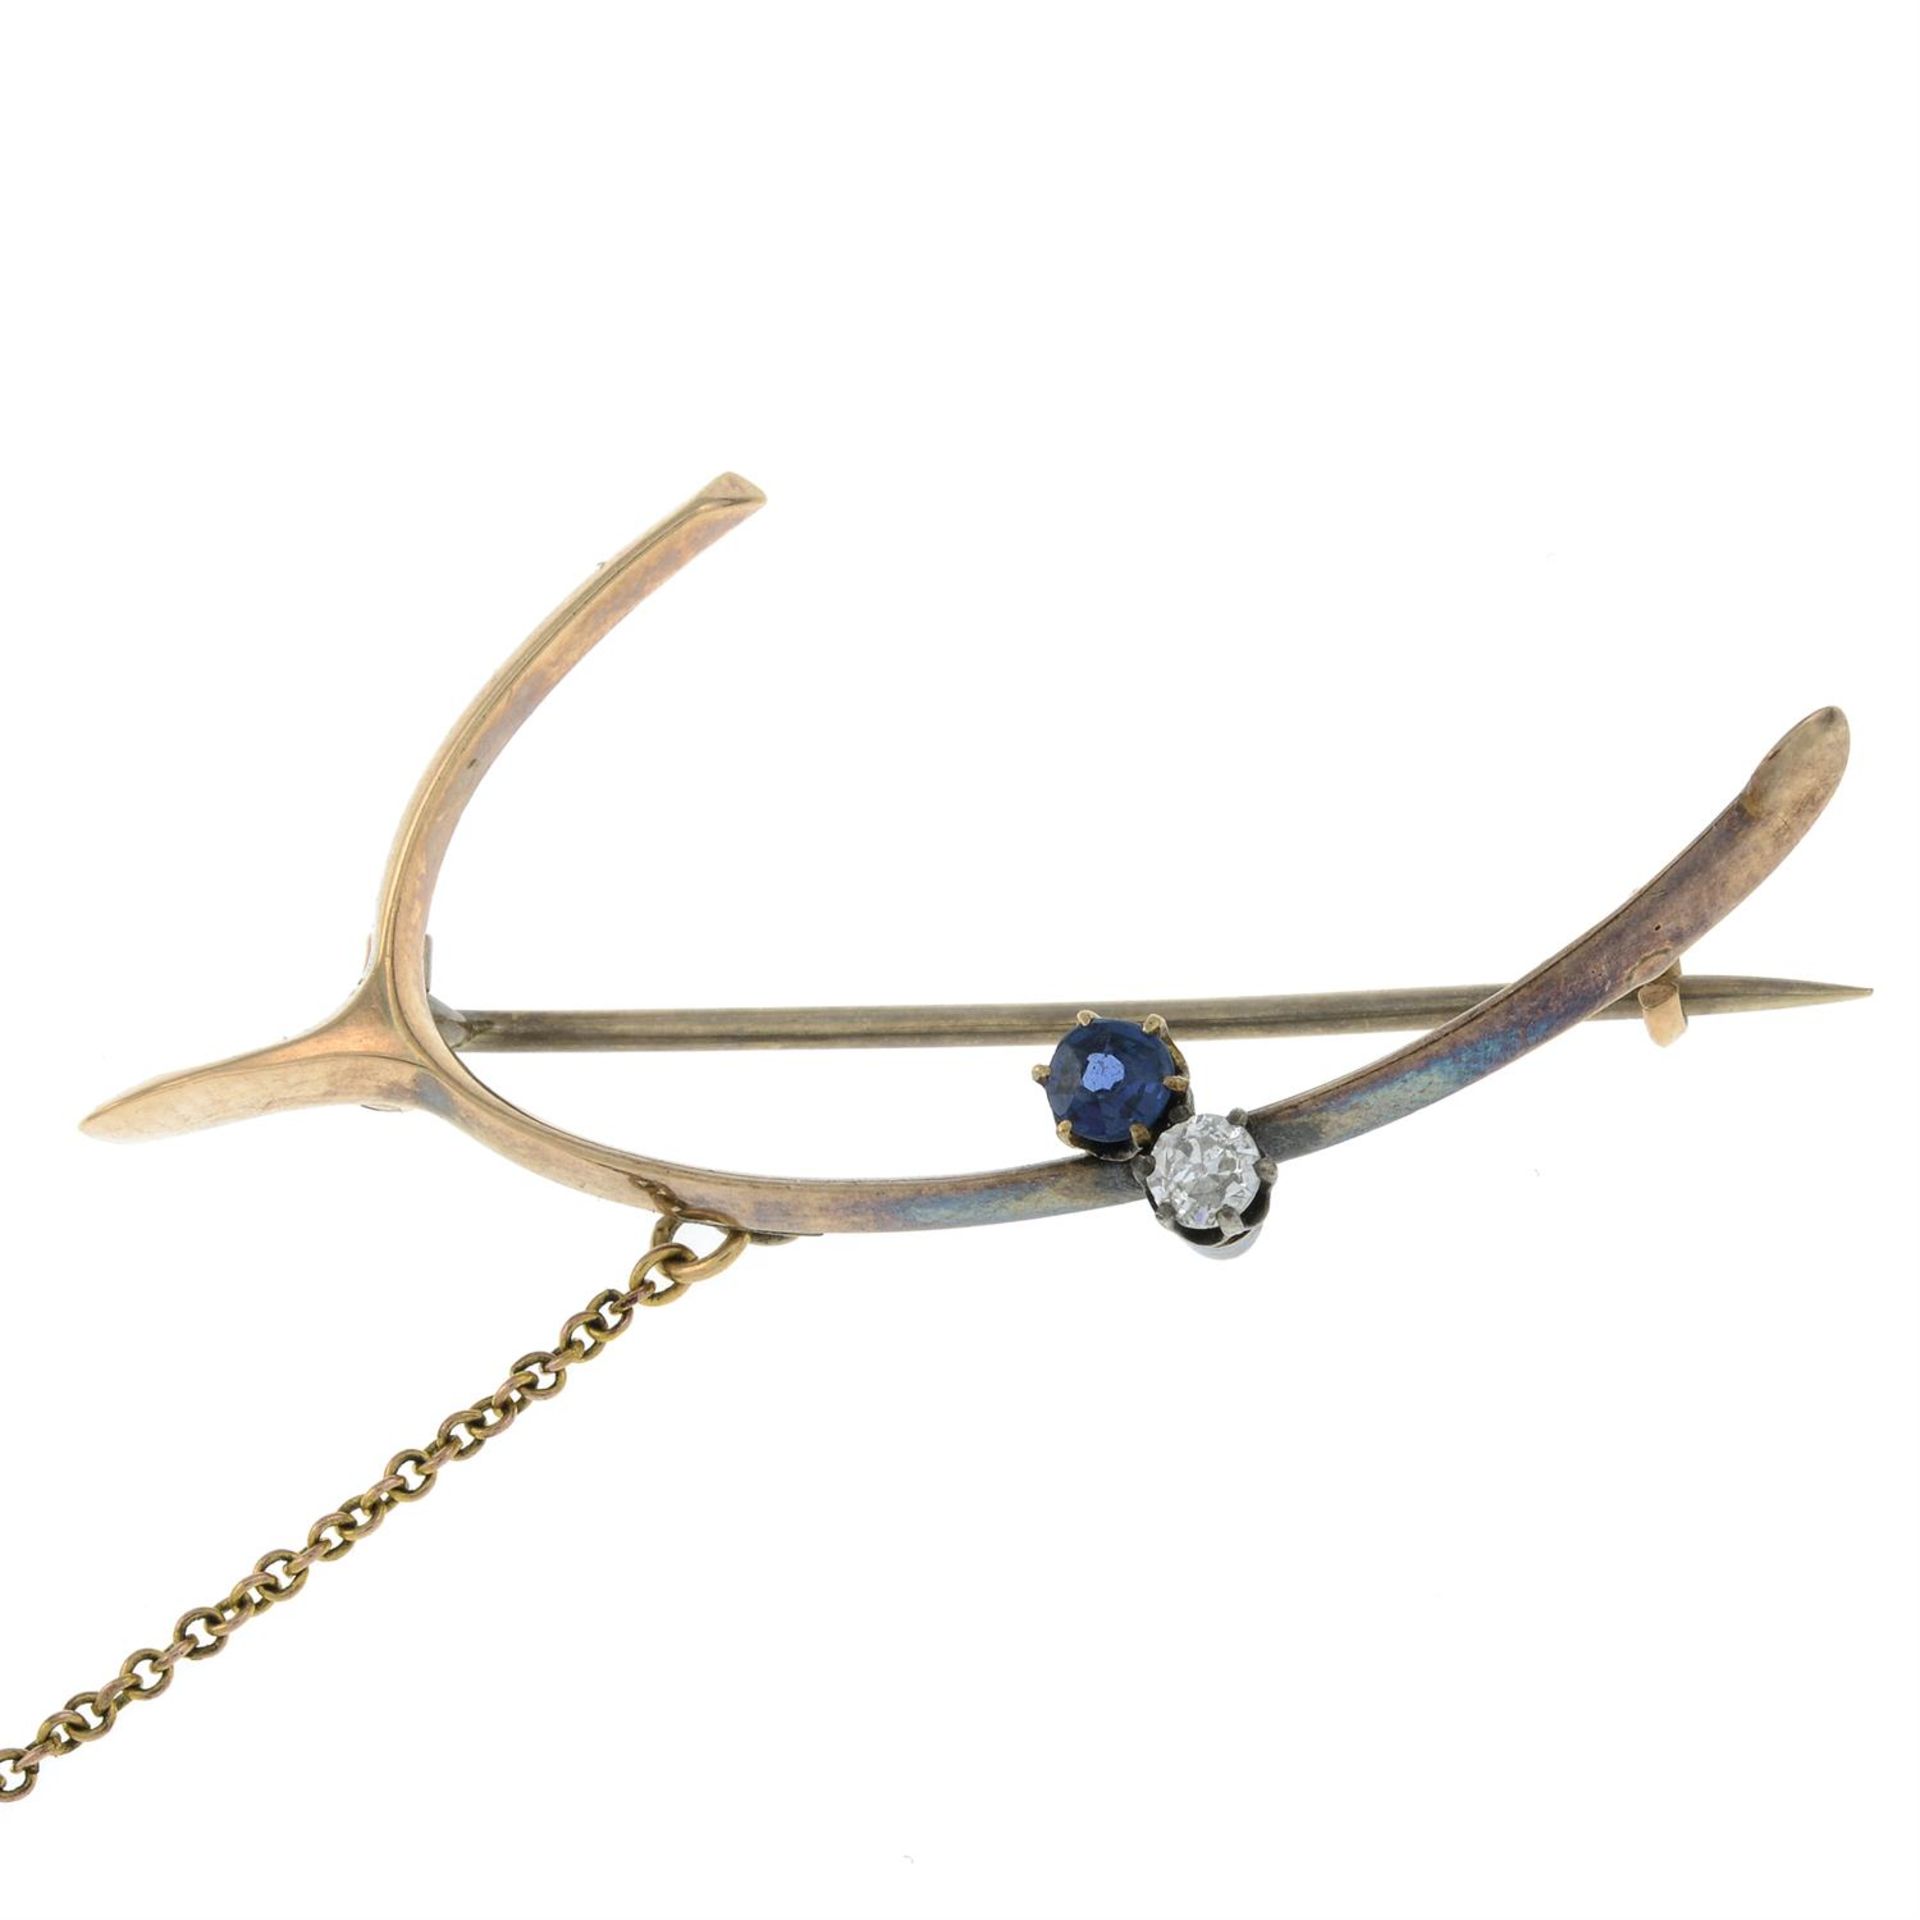 A wishing bone brooch, with sapphire and diamond accents.